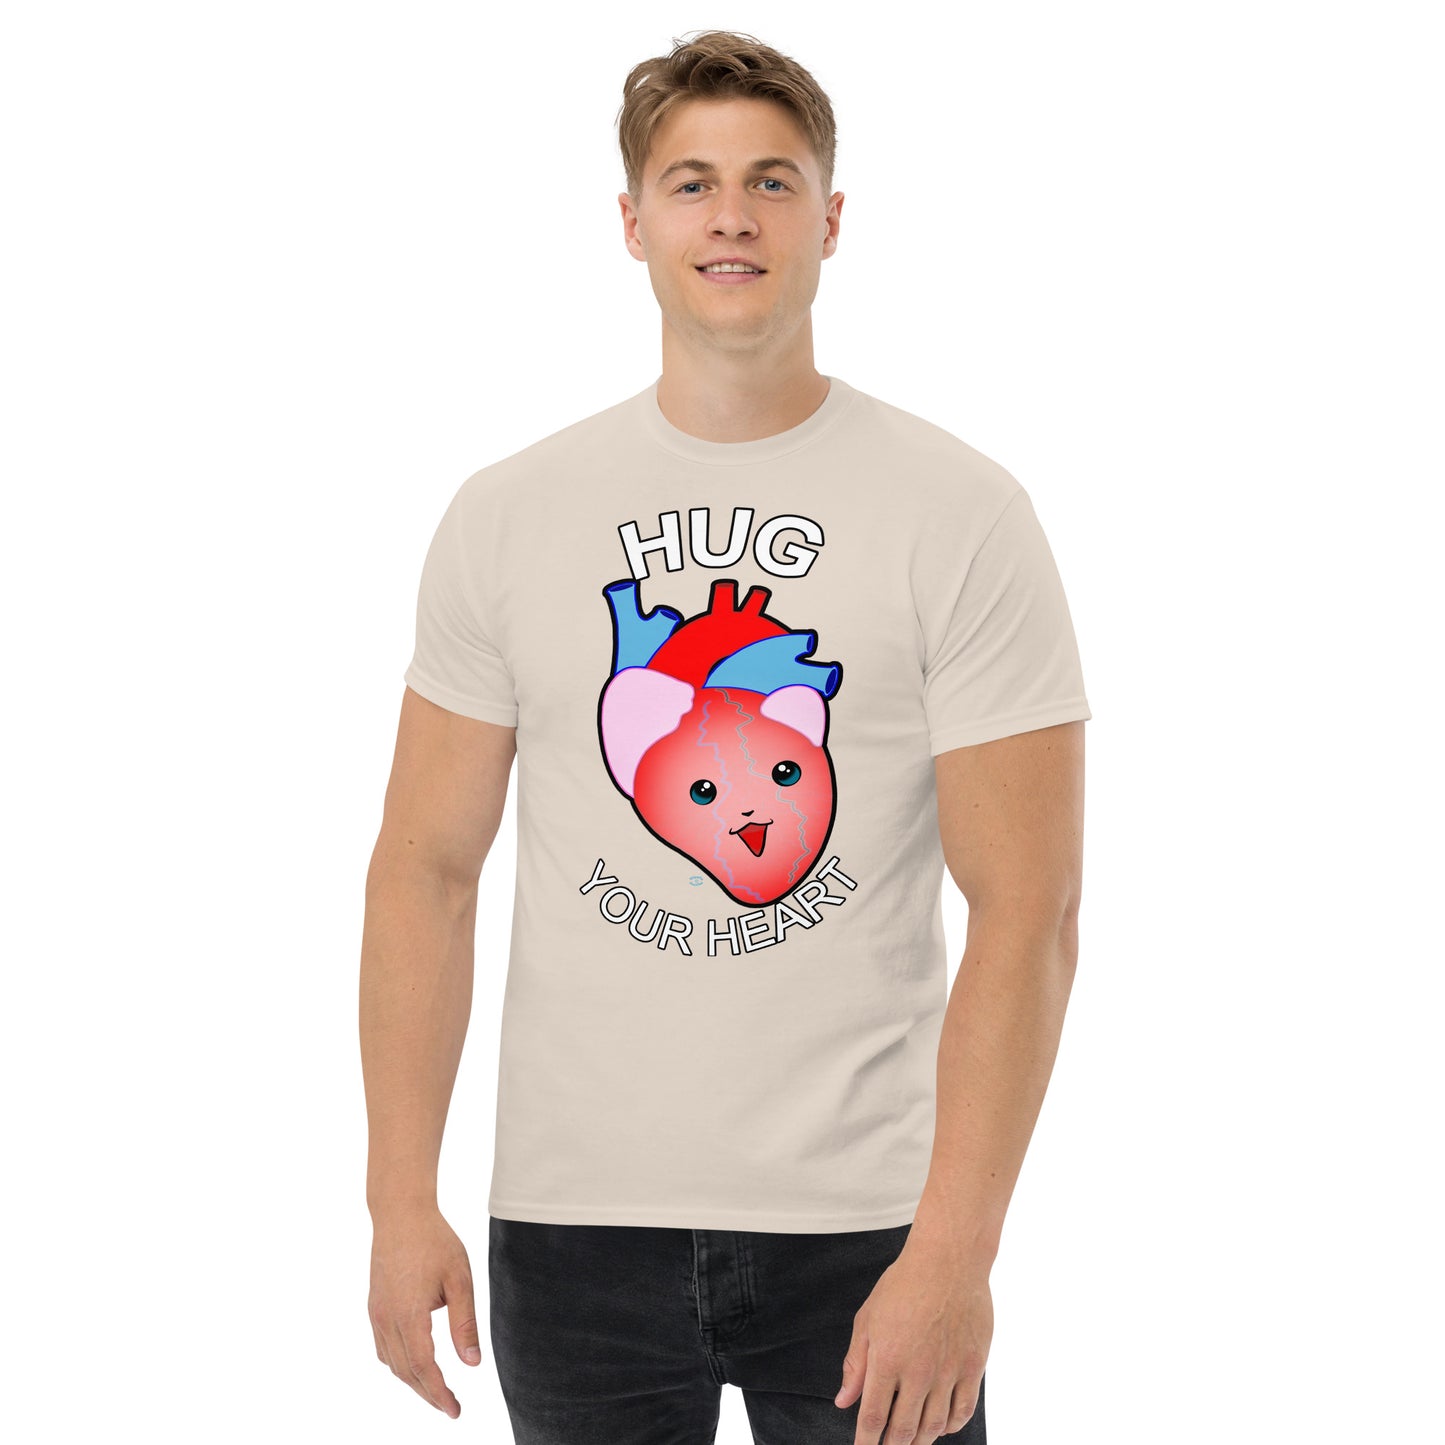 A Picture of a man wearing a short sleeved tshirt with a picture on the front of a smiling heart with the text "HUG Your Heart" - color natural cream